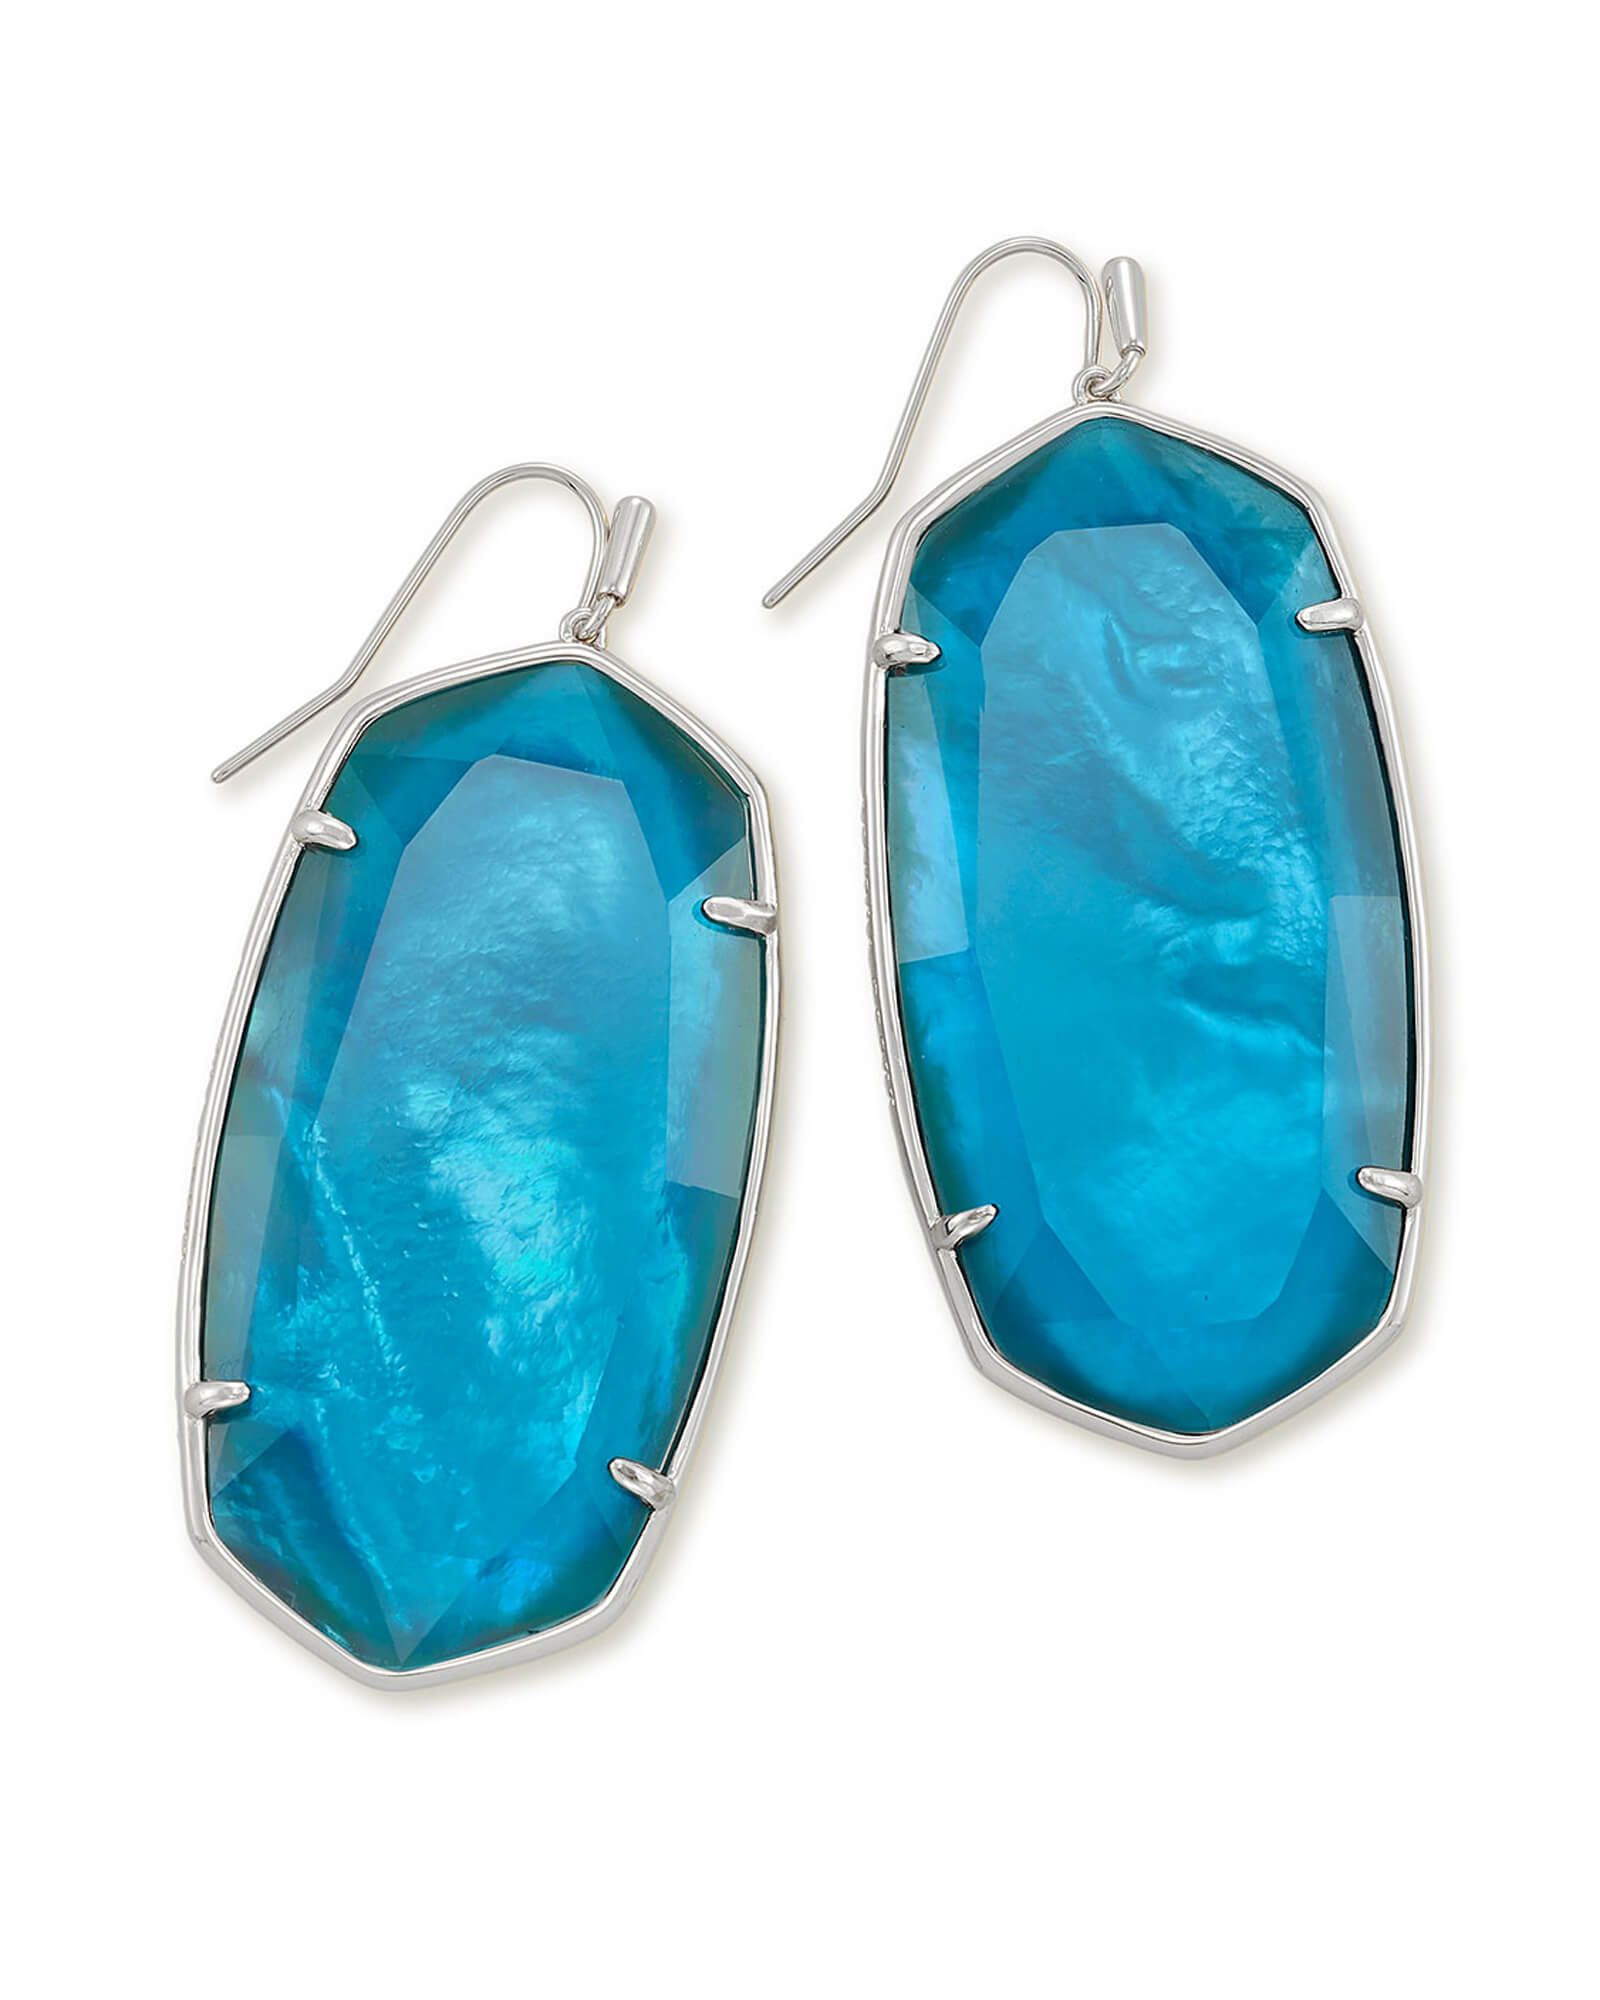 Faceted Danielle Silver Statement Earrings in Peacock Blue Illusion | Kendra Scott